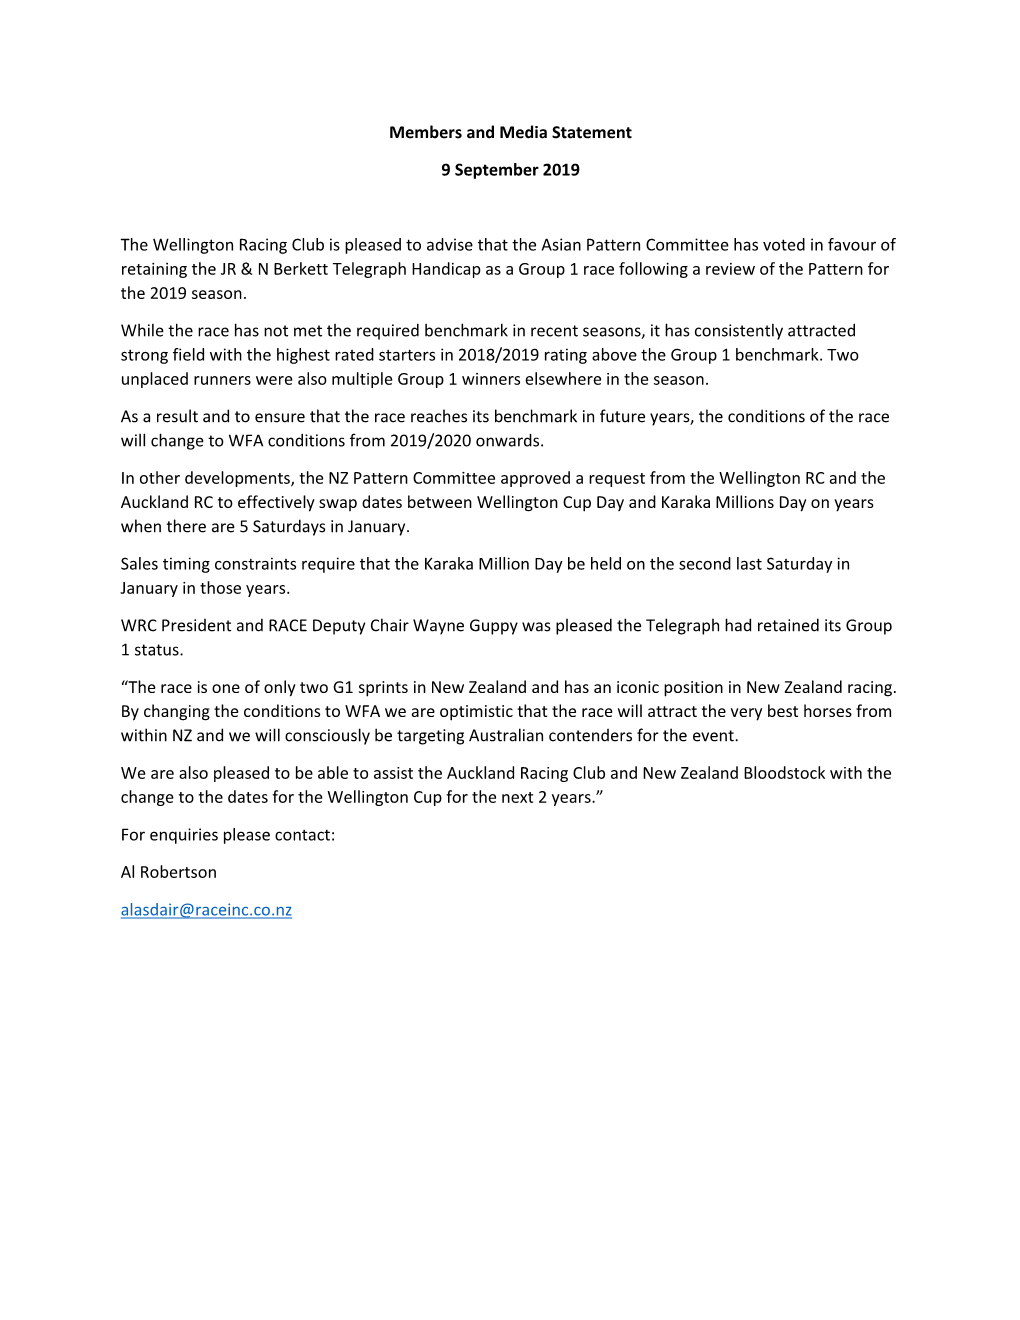 Members and Media Statement 9 September 2019 the Wellington